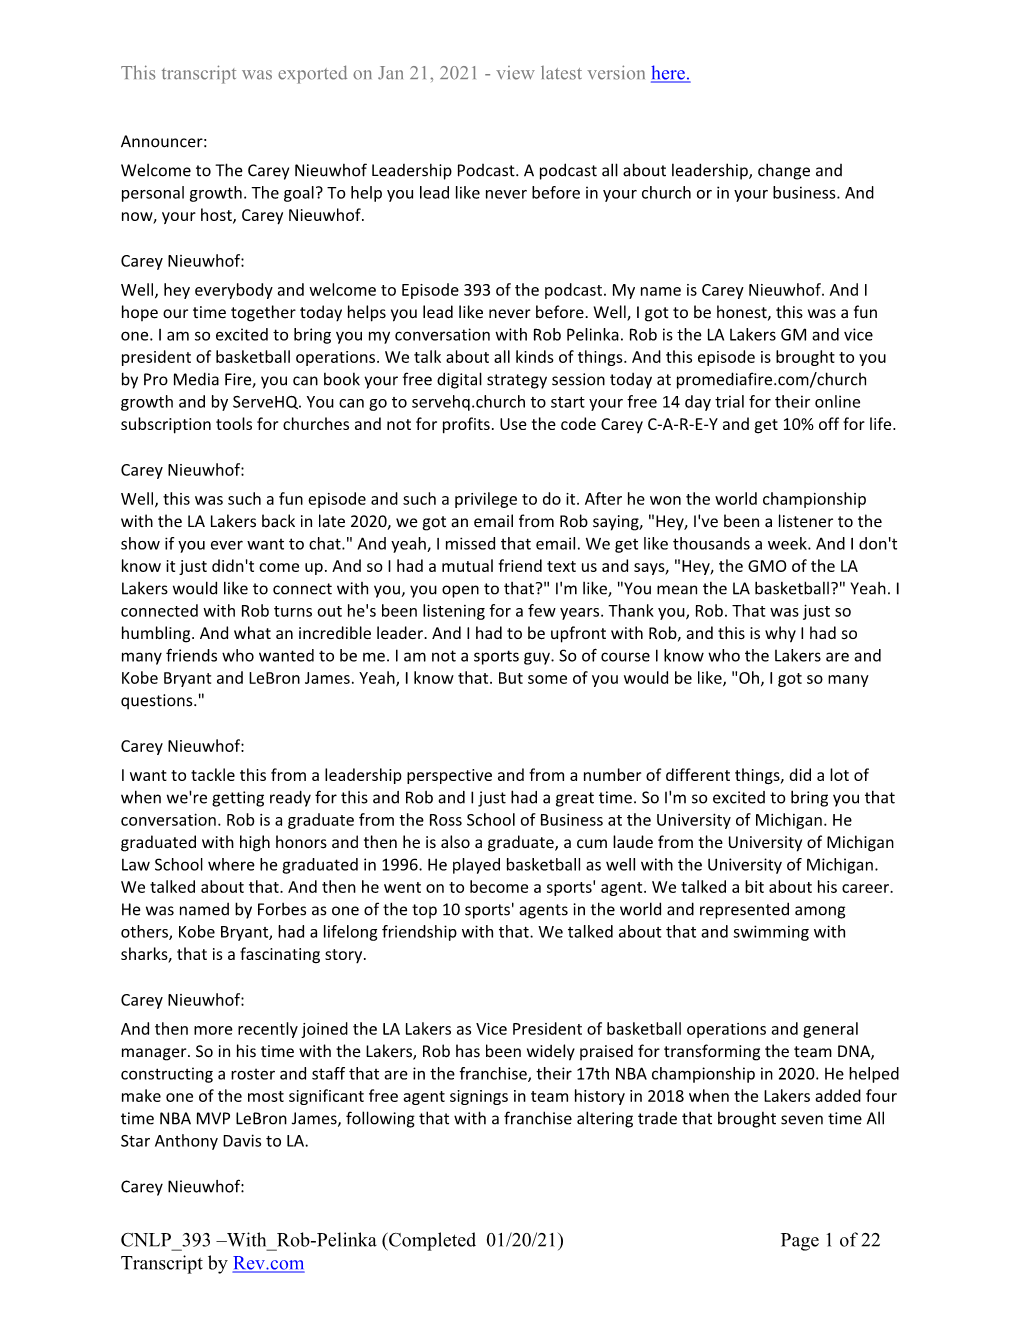 With Rob-Pelinka (Completed 01/20/21) Page 1 of 22 Transcript by Rev.Com This Transcript Was Exported on Jan 21, 2021 - View Latest Version Here